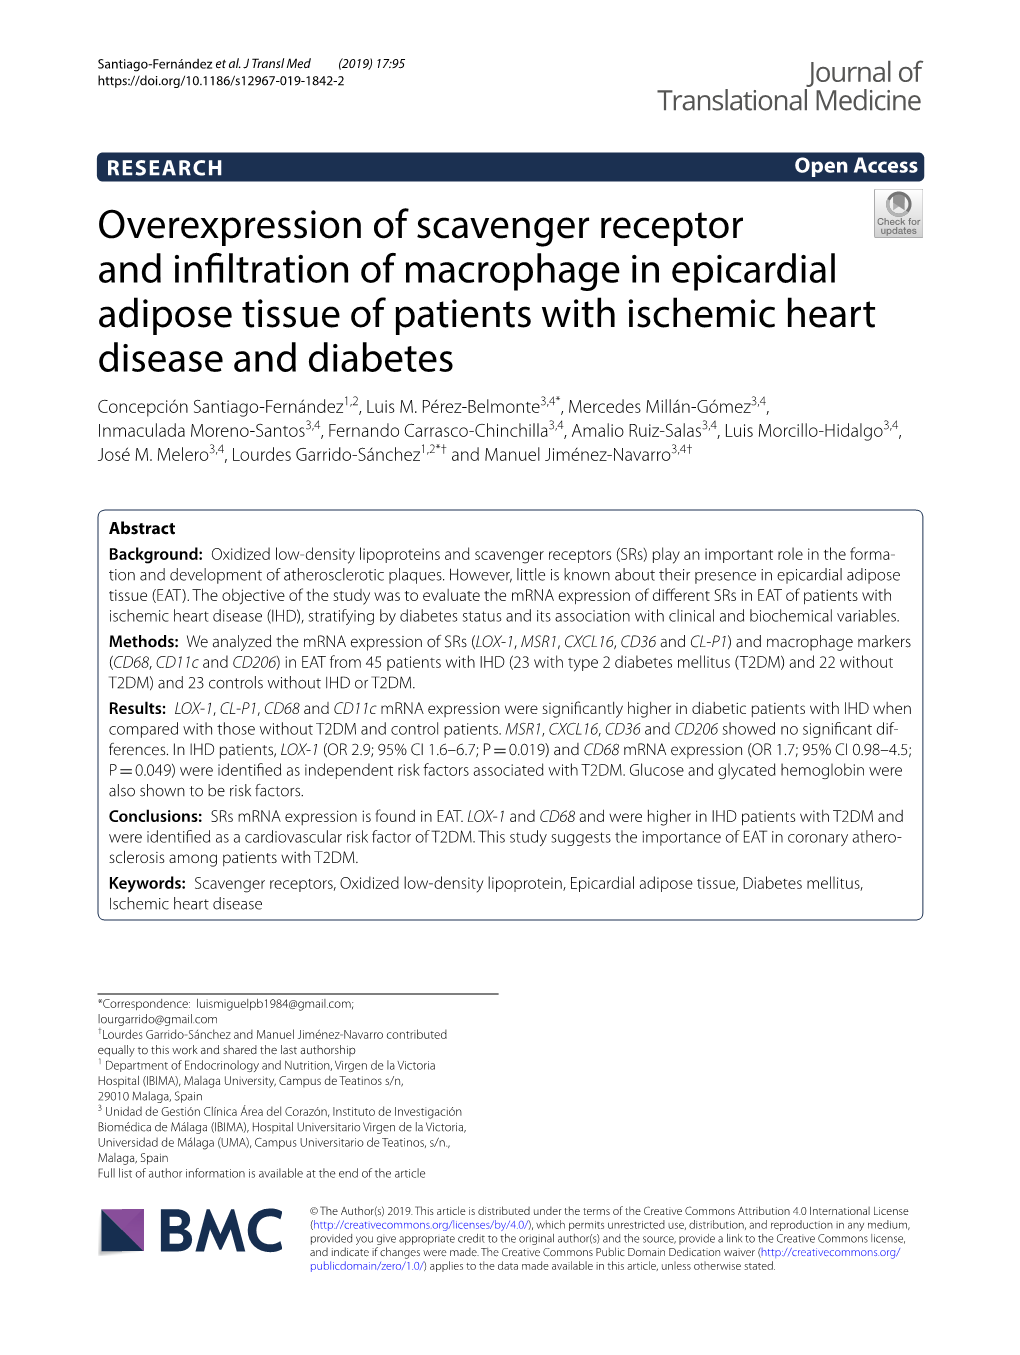 Overexpression of Scavenger Receptor and Infiltration of Macrophage in Epicardial Adipose Tissue of Patients with Ischemic Heart